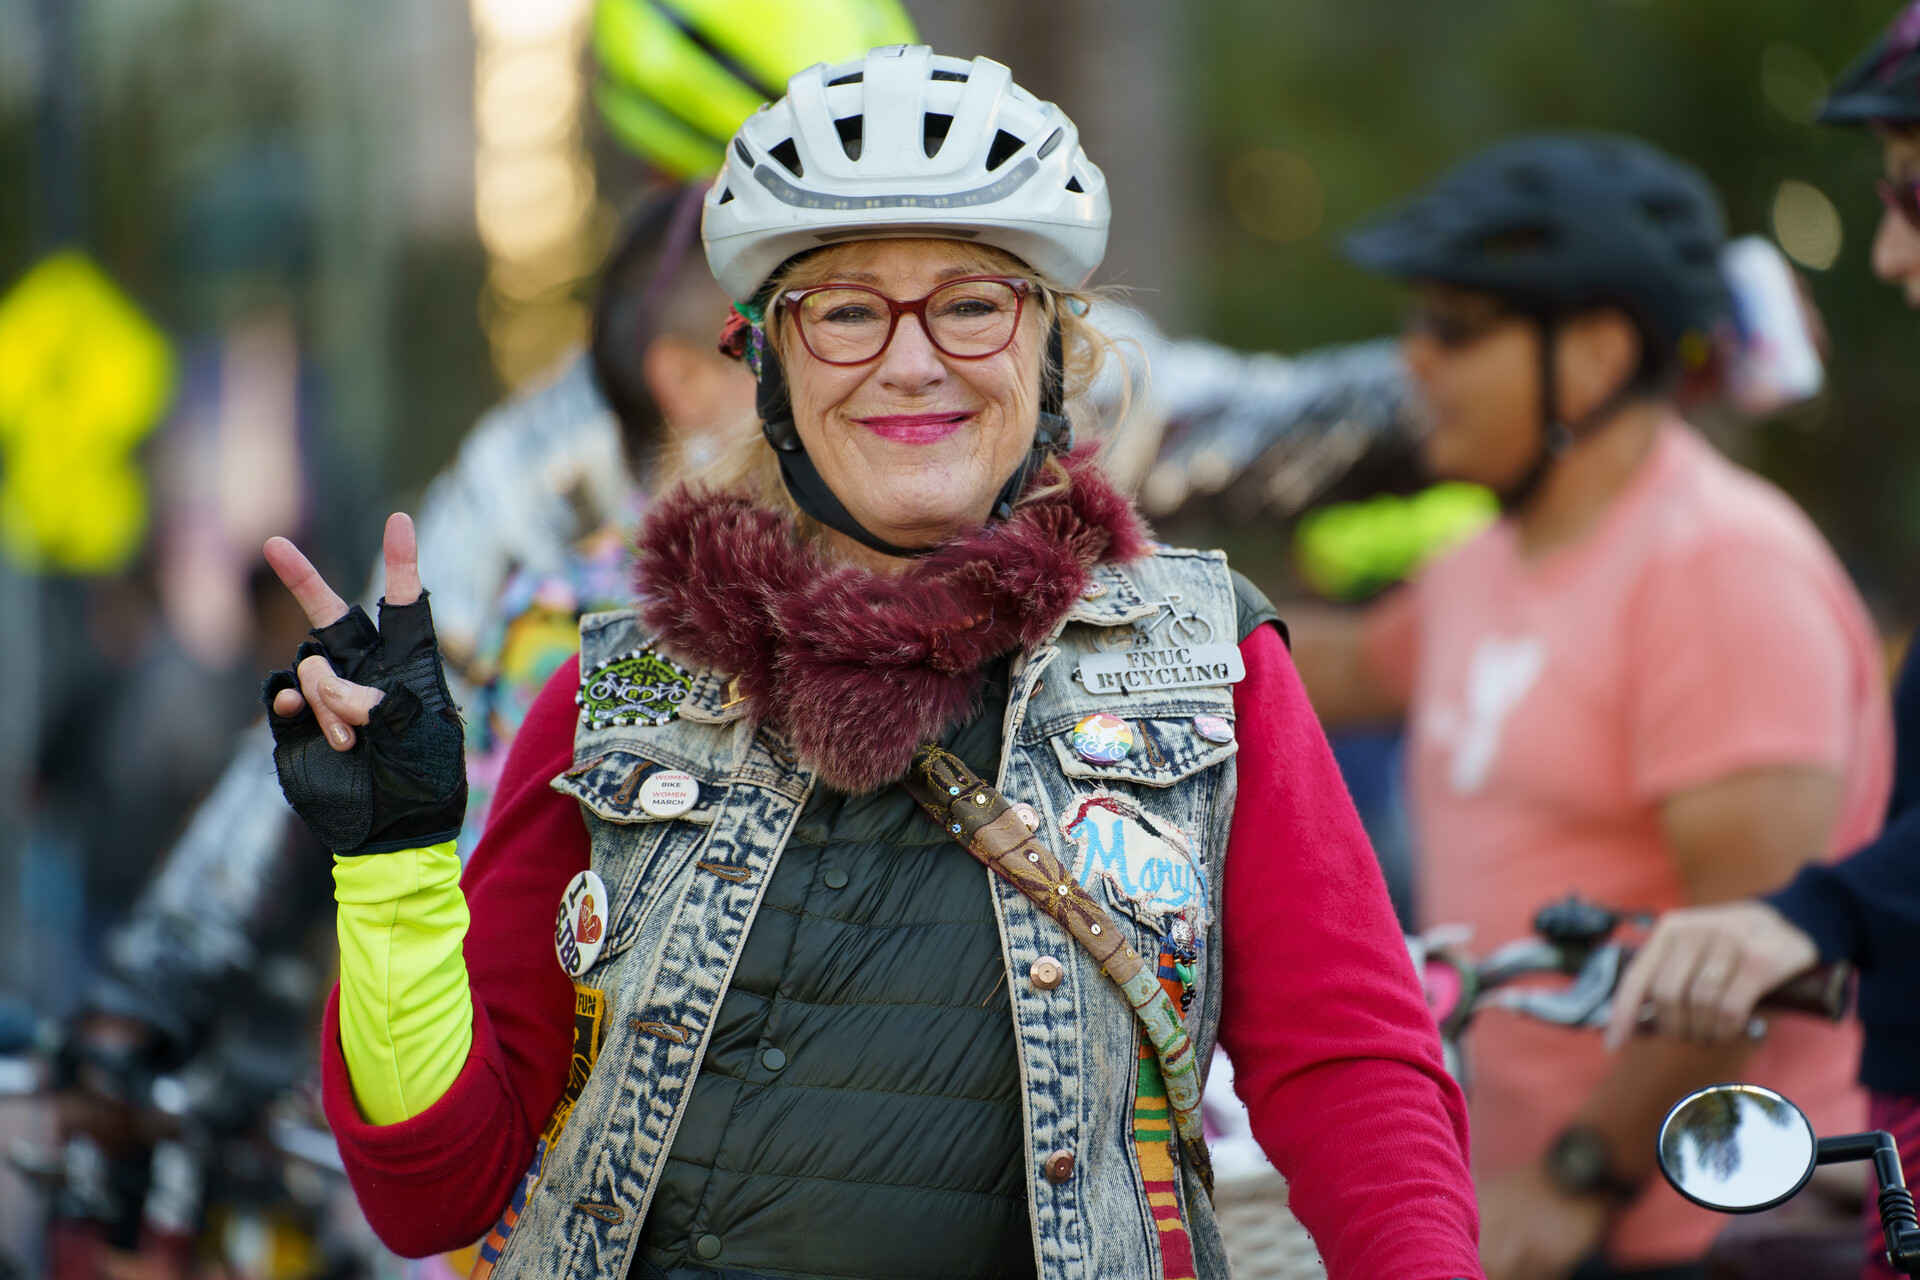 A woman in her seventies wearing a helmet, glasses, red long-sleeve sweater and a jean vest waves at the camera.